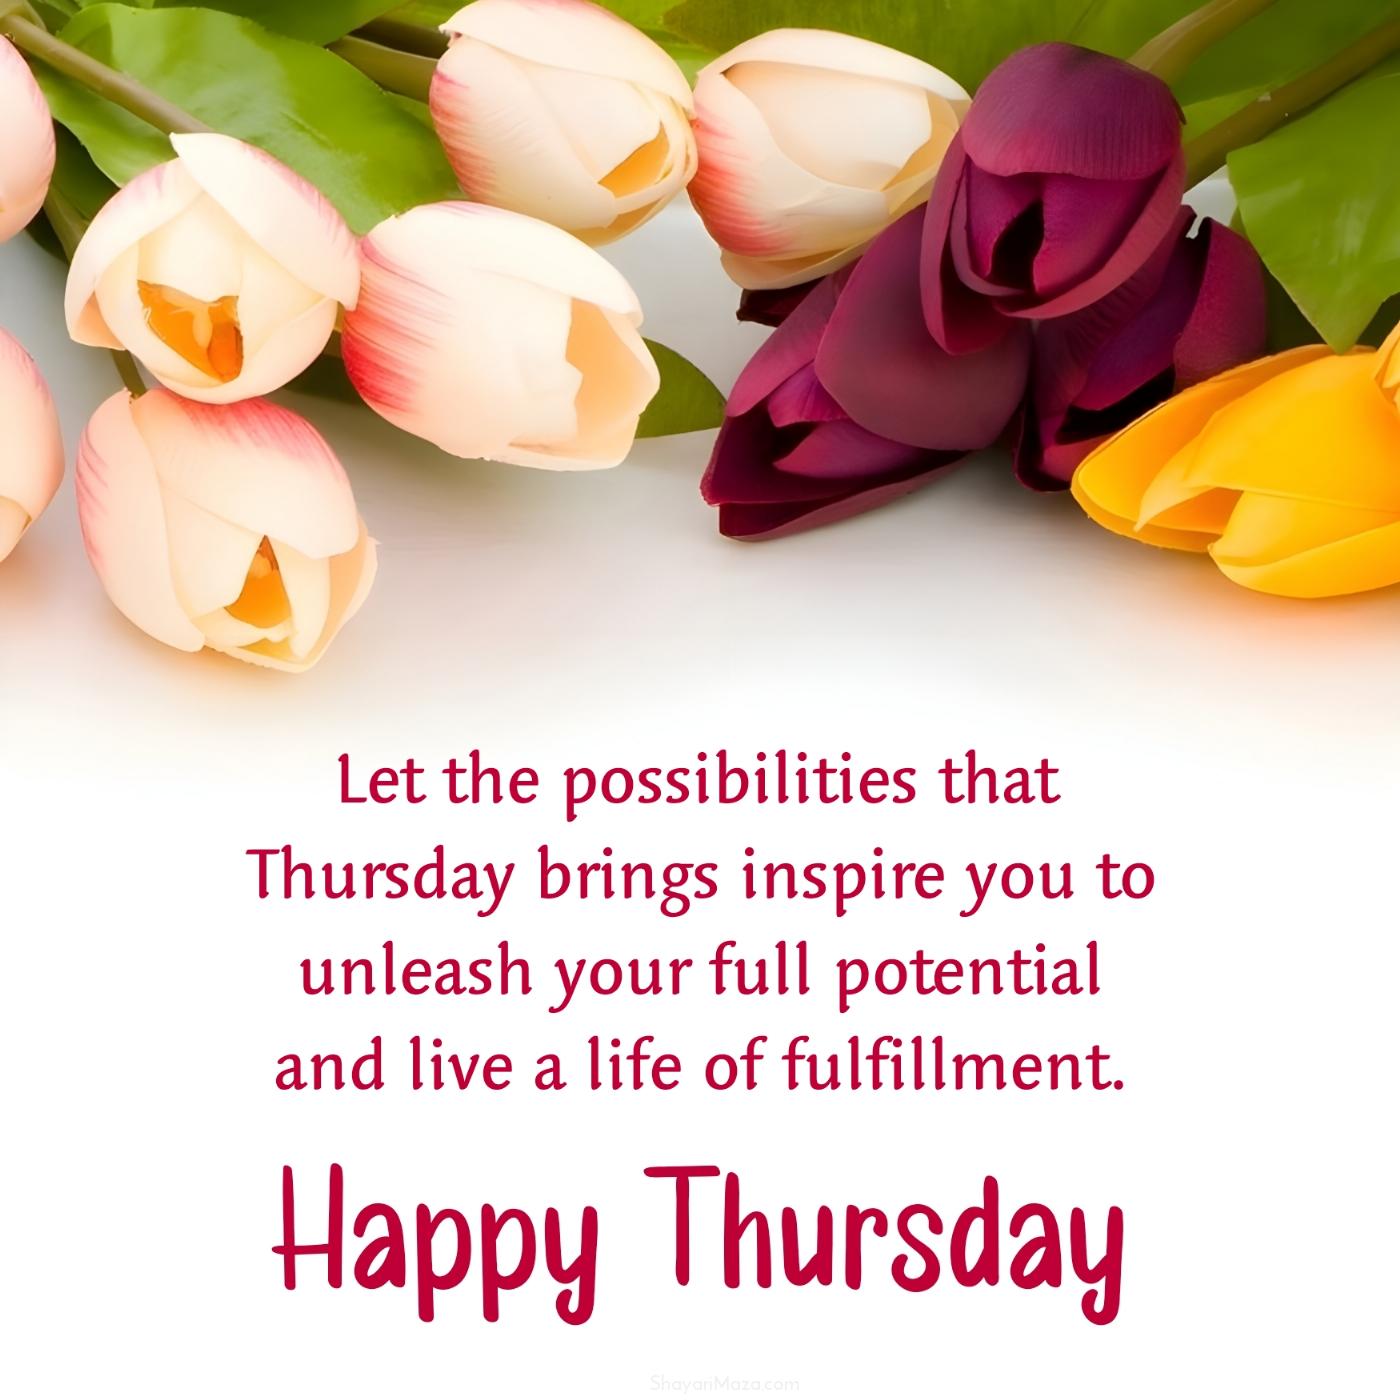 Let the possibilities that Thursday brings inspire you